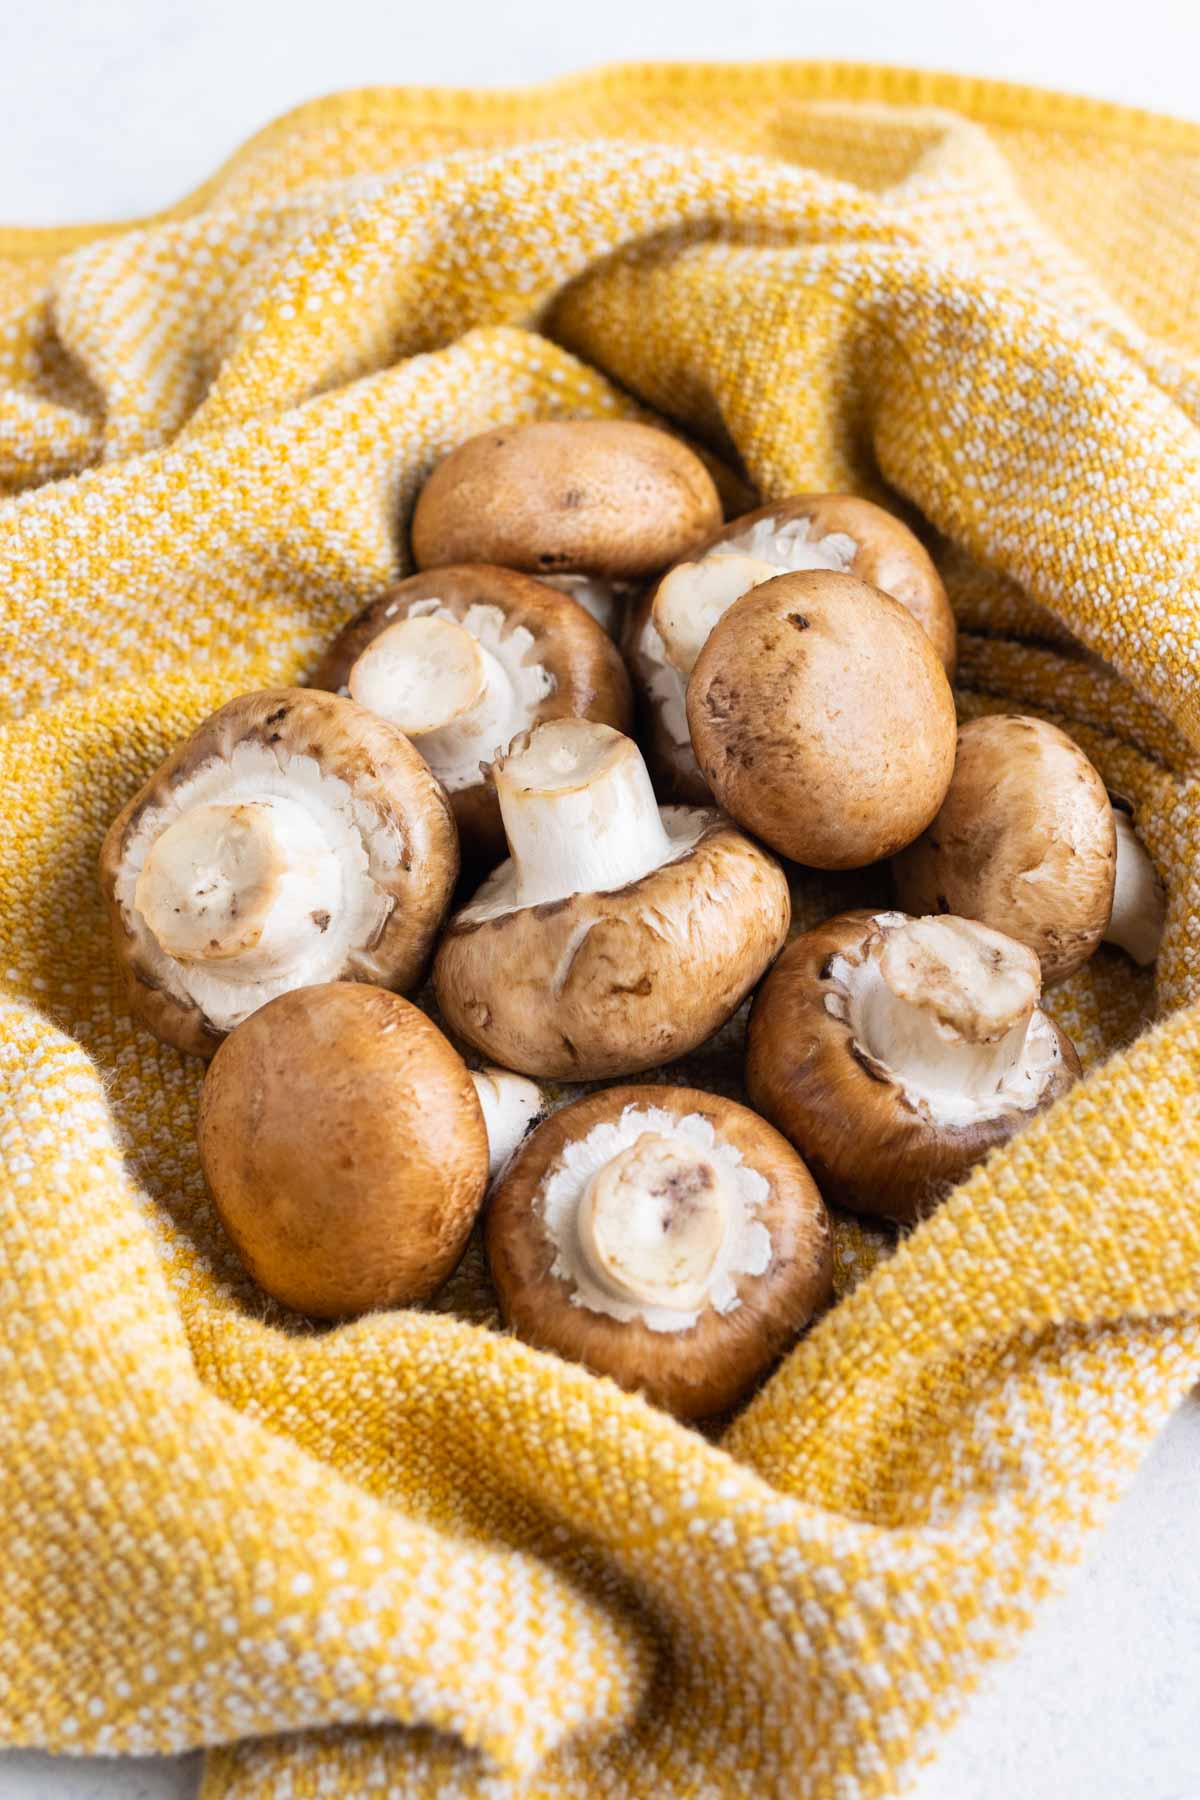 Whole mushrooms surrounded with a yellow kitchen towel.